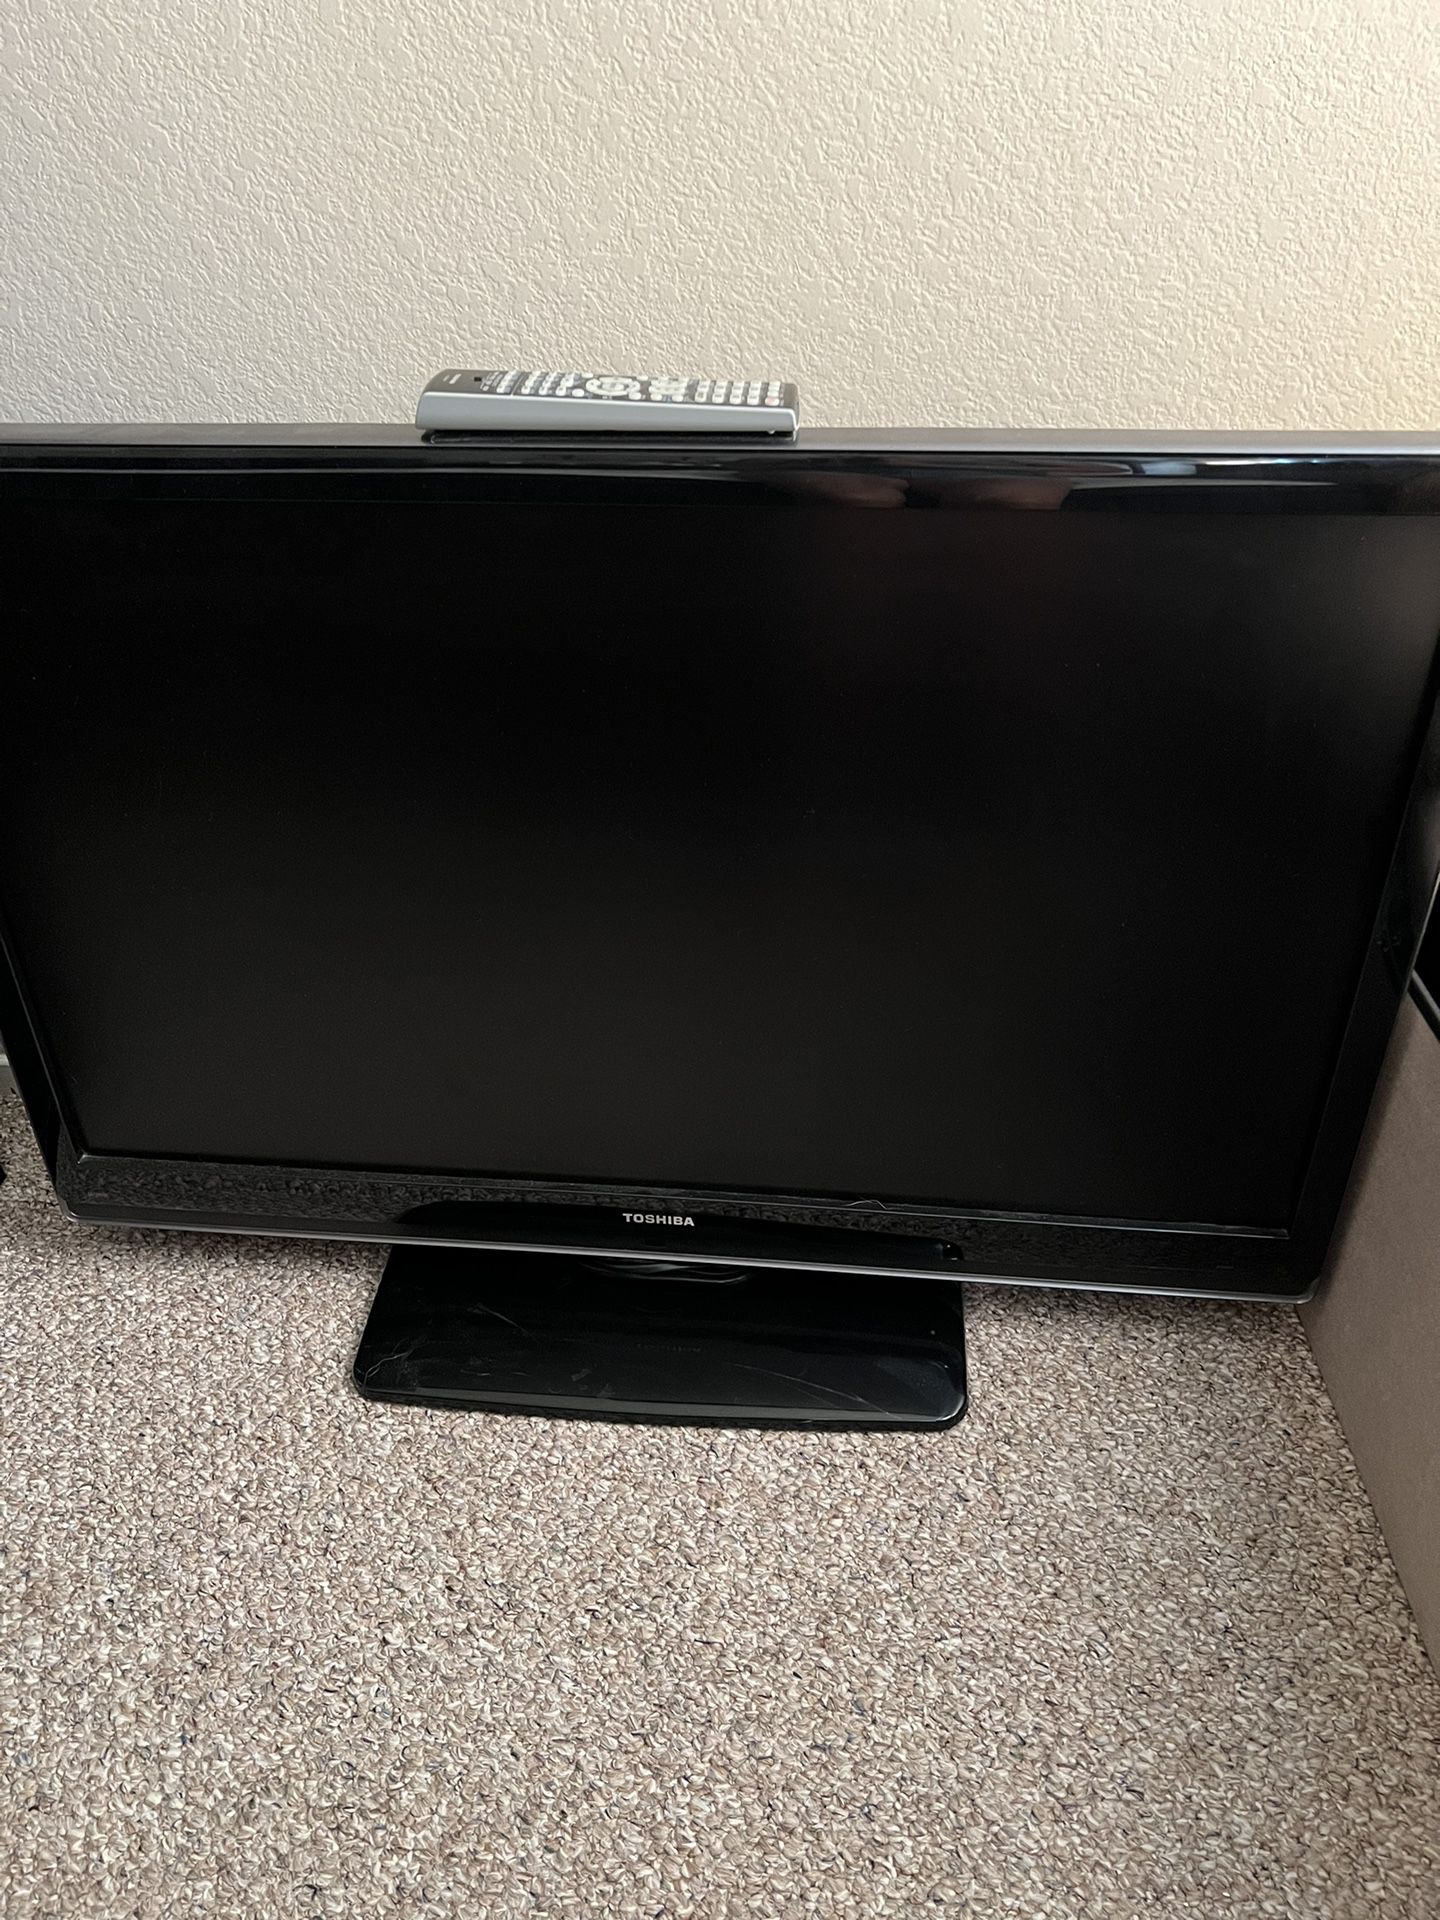 42” Toshiba TV with Remote 